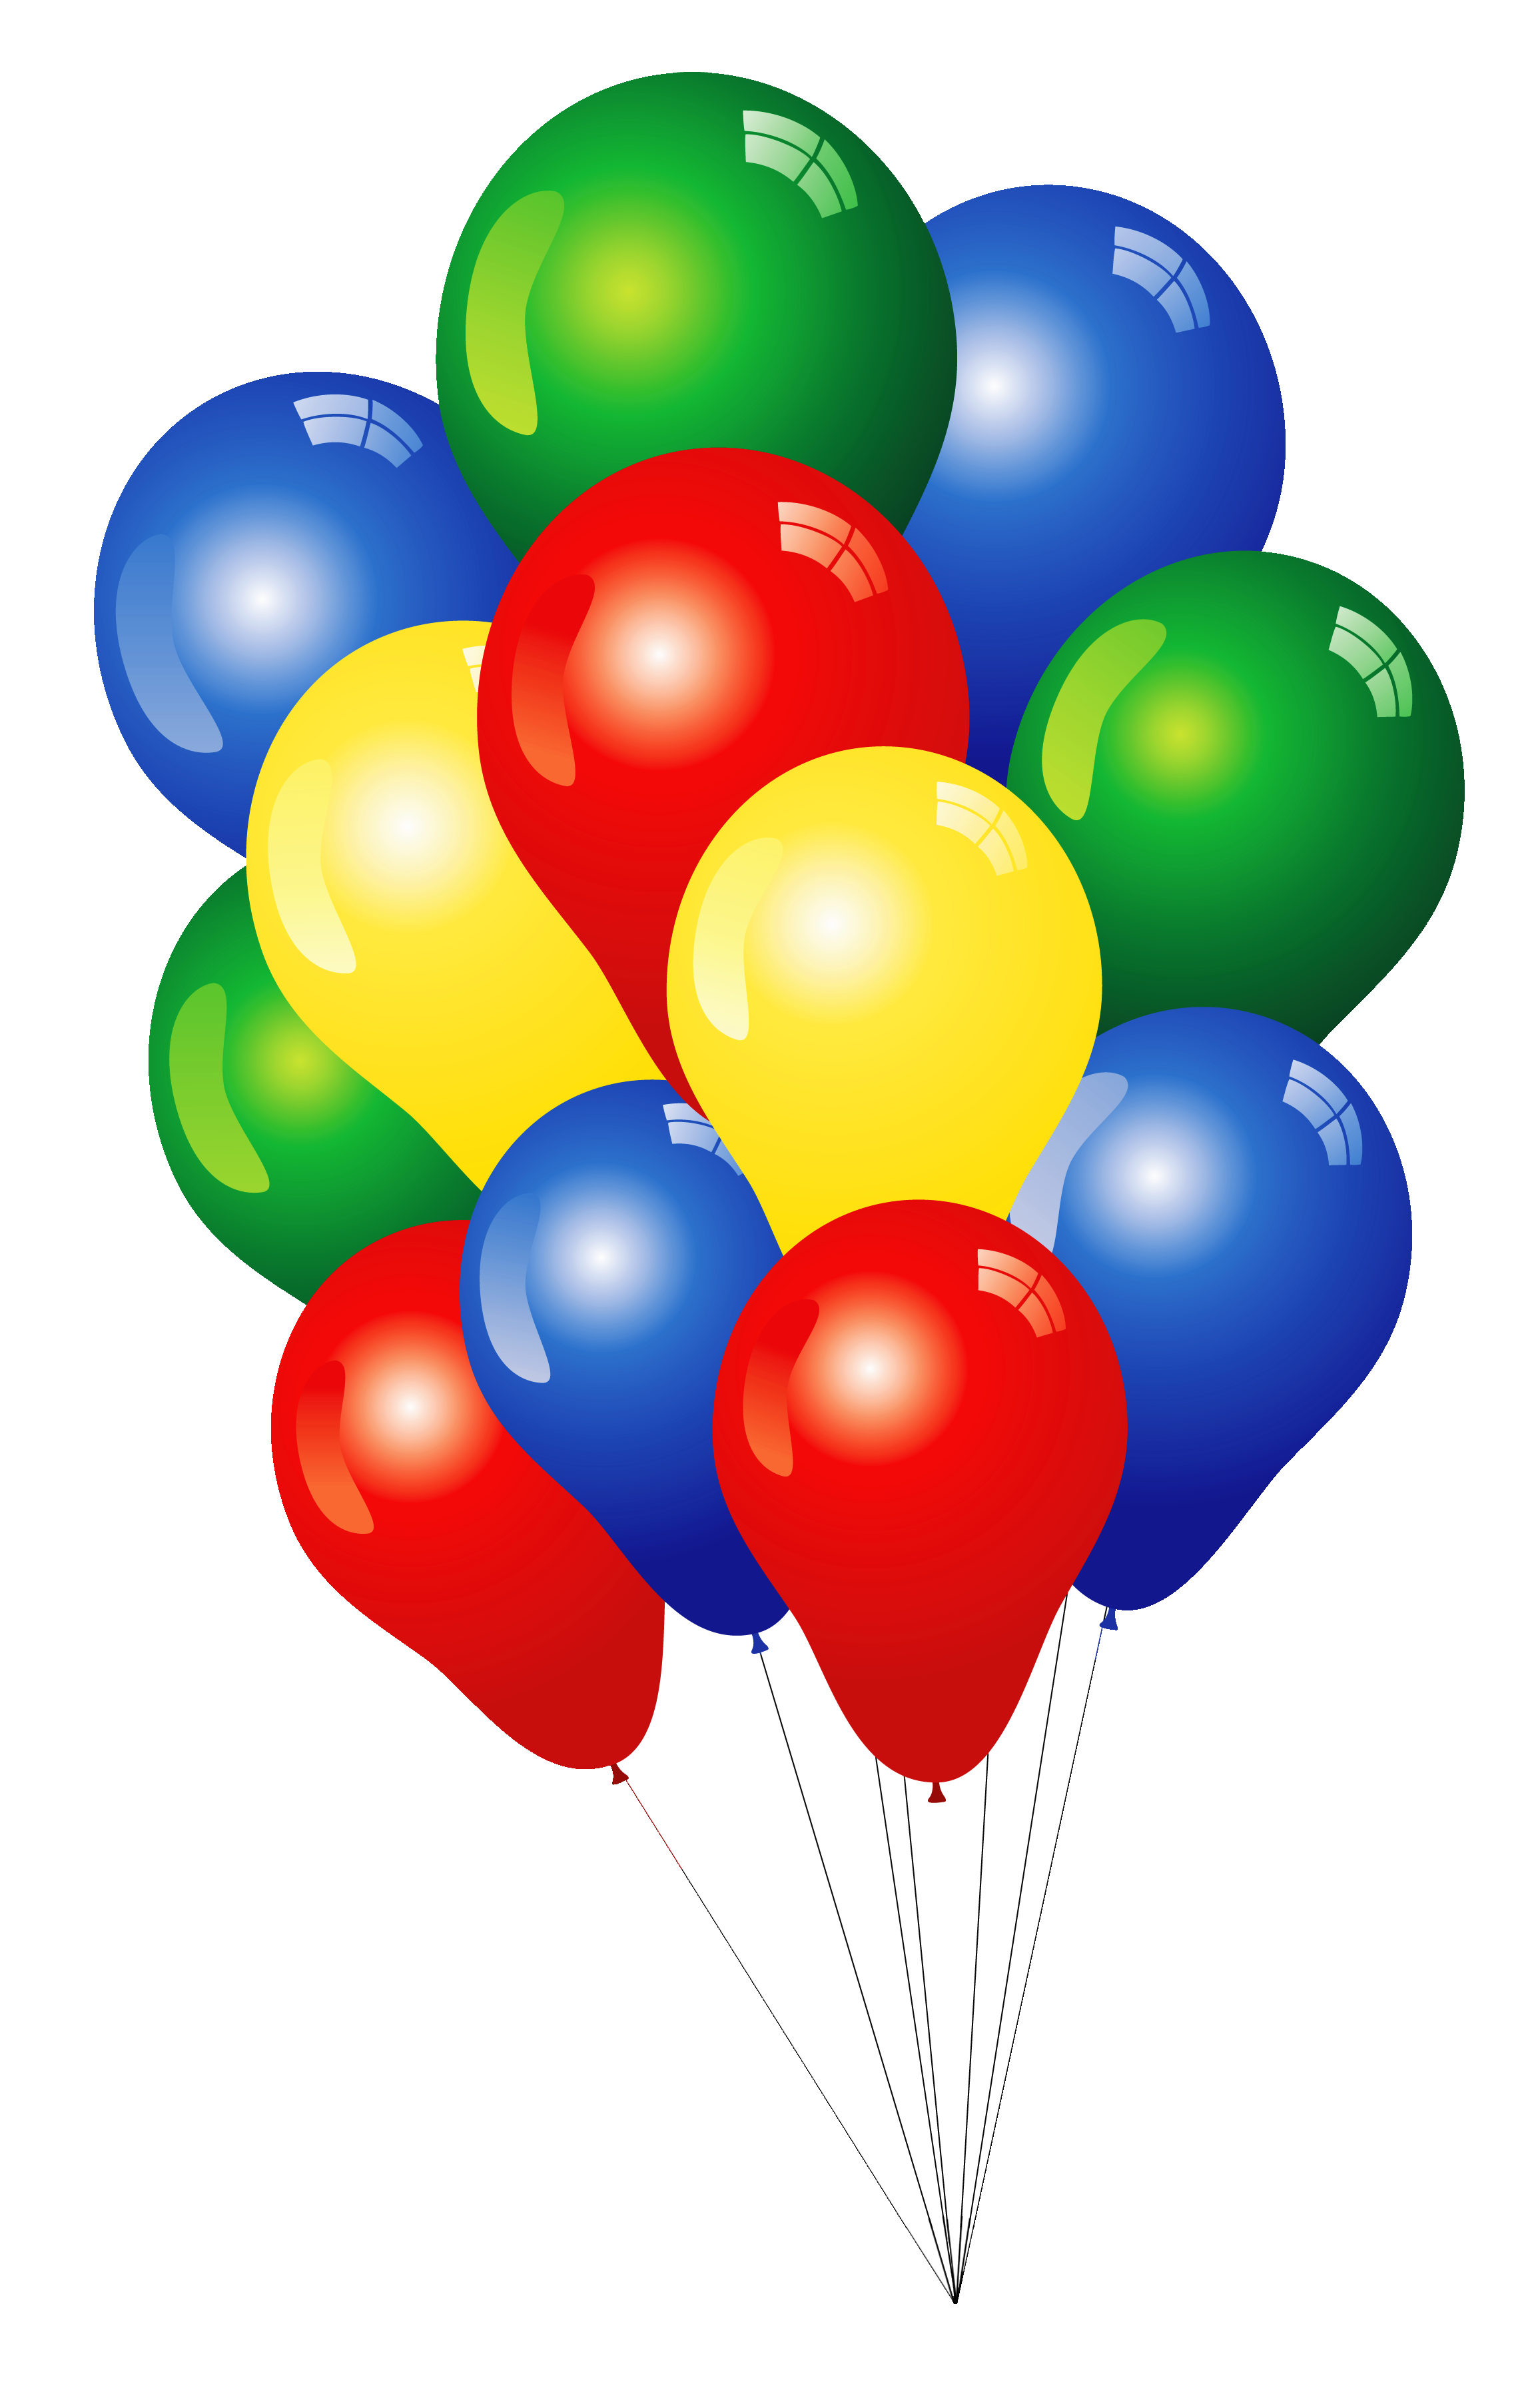 Free birthday balloon clip art free clipart images 4 - Cliparting.com